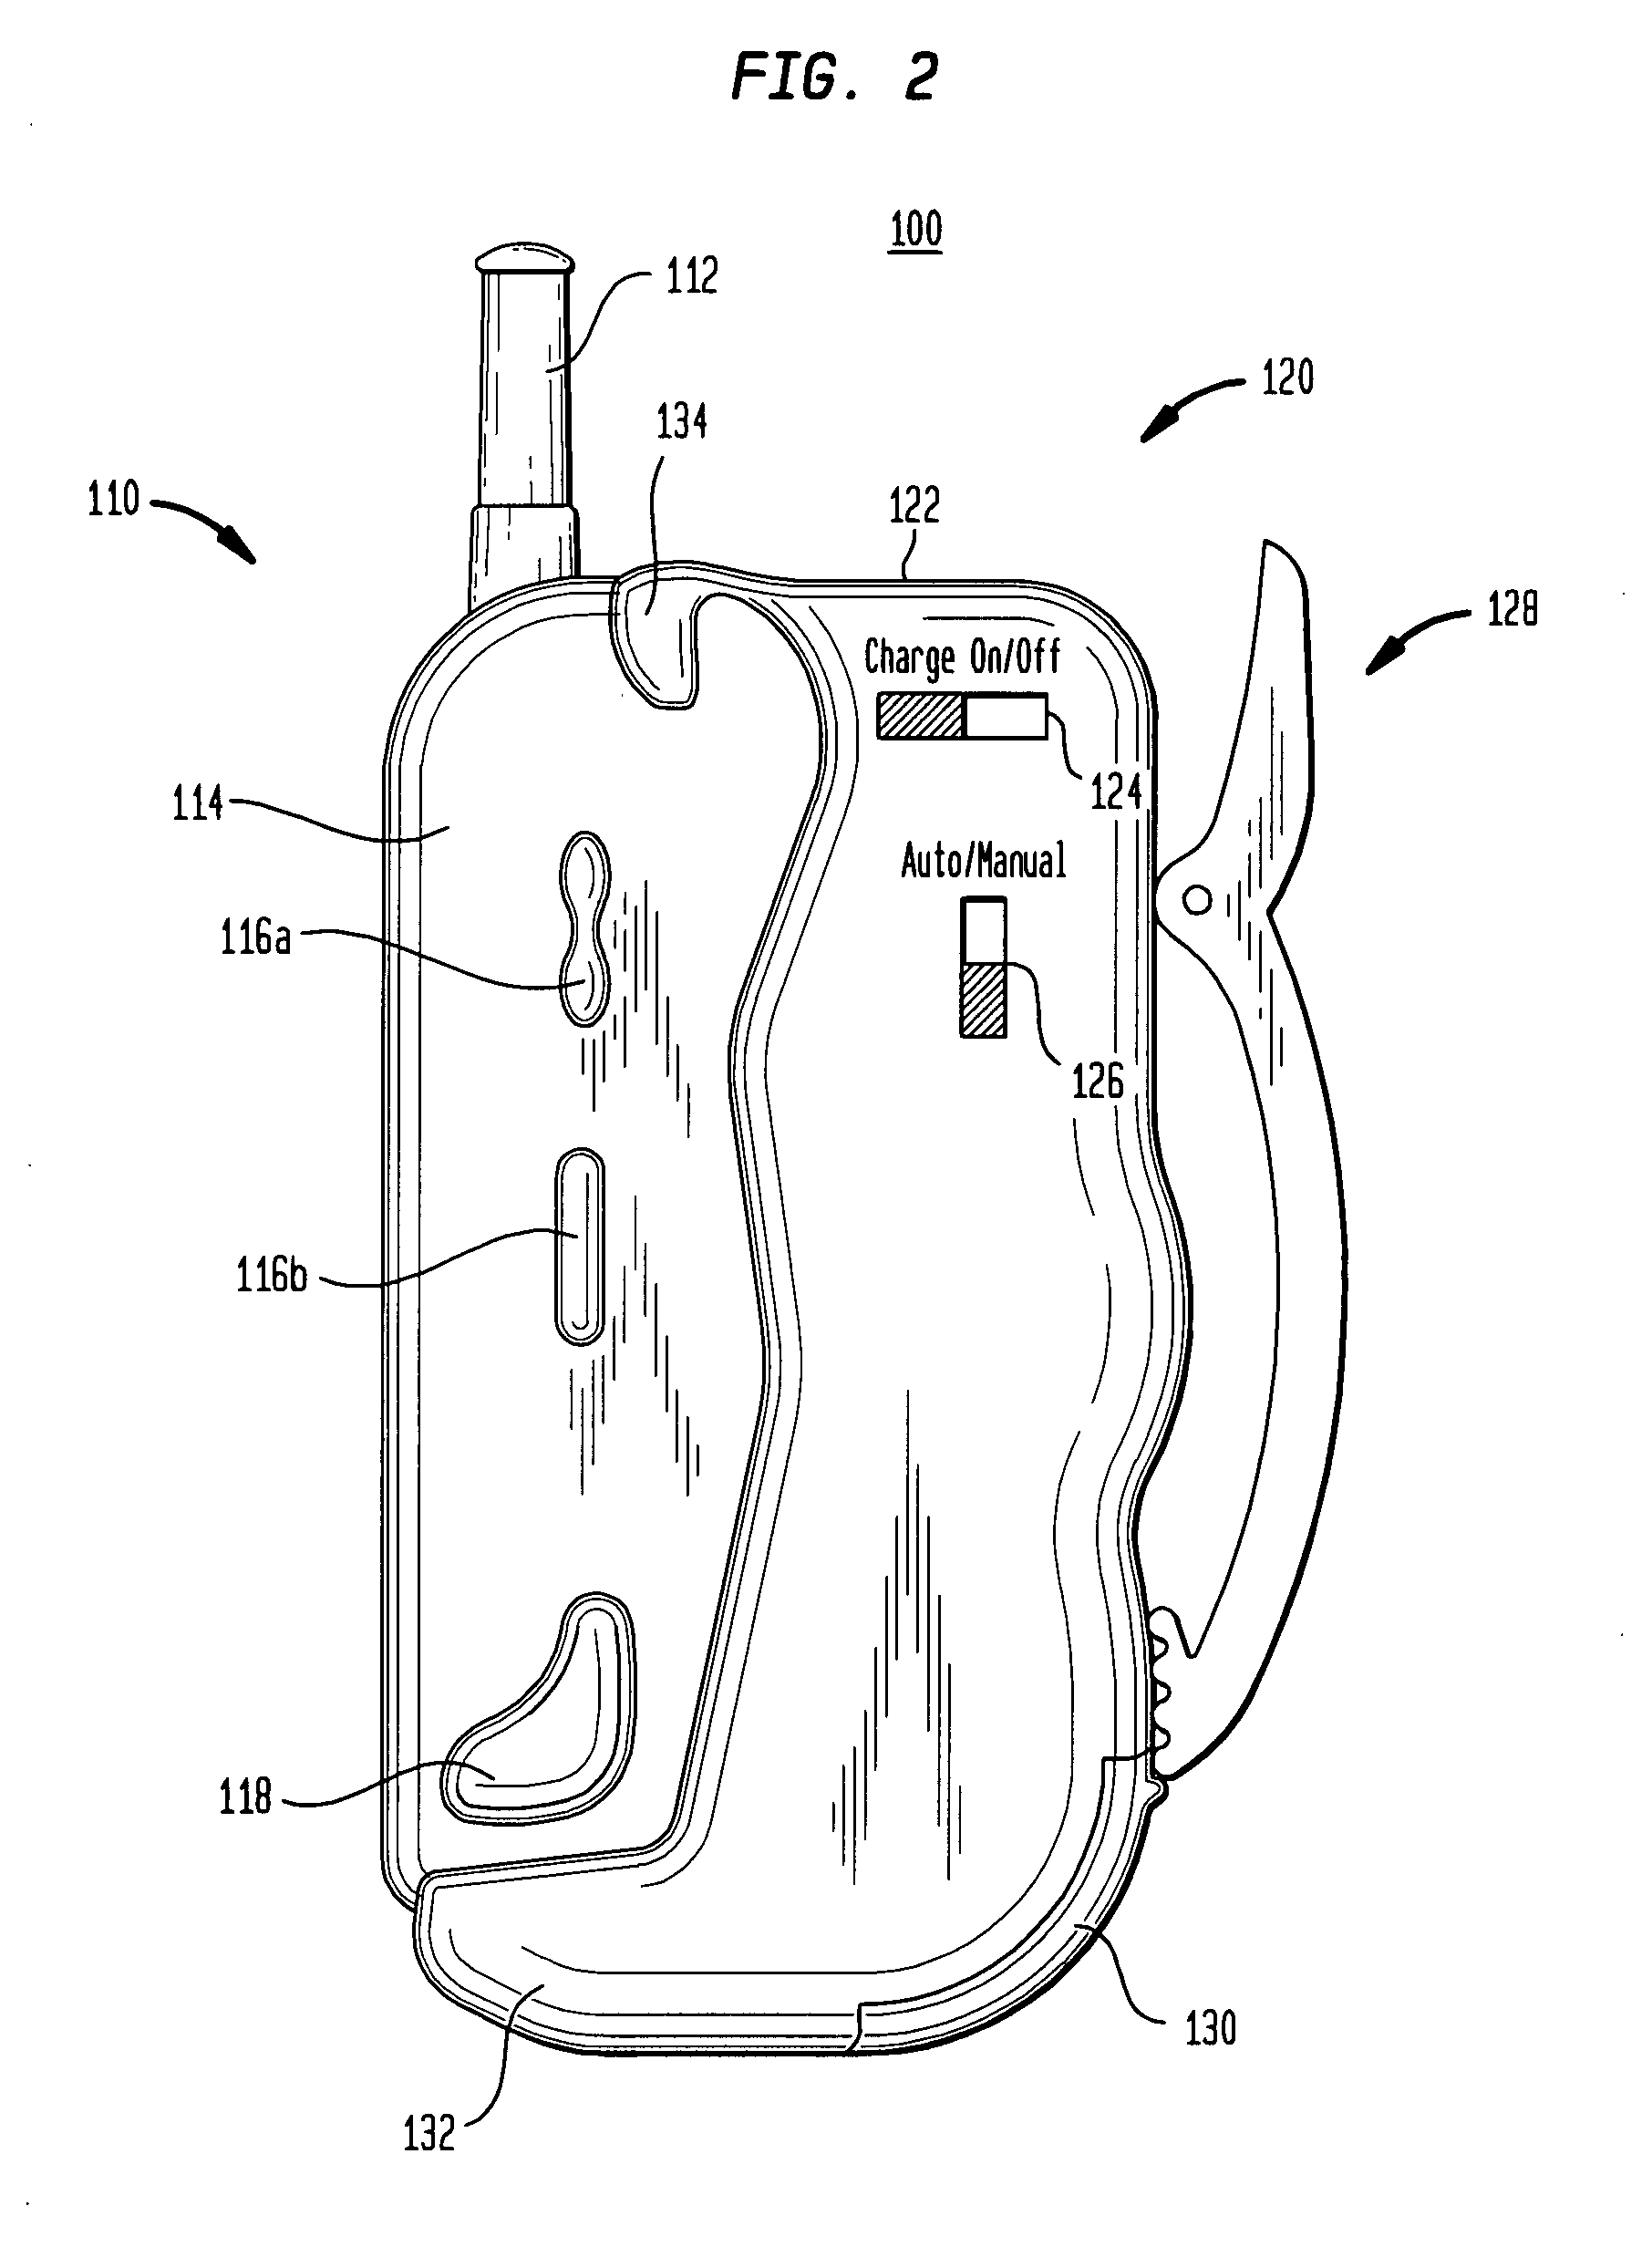 Recharging device for use with portable electronic devices